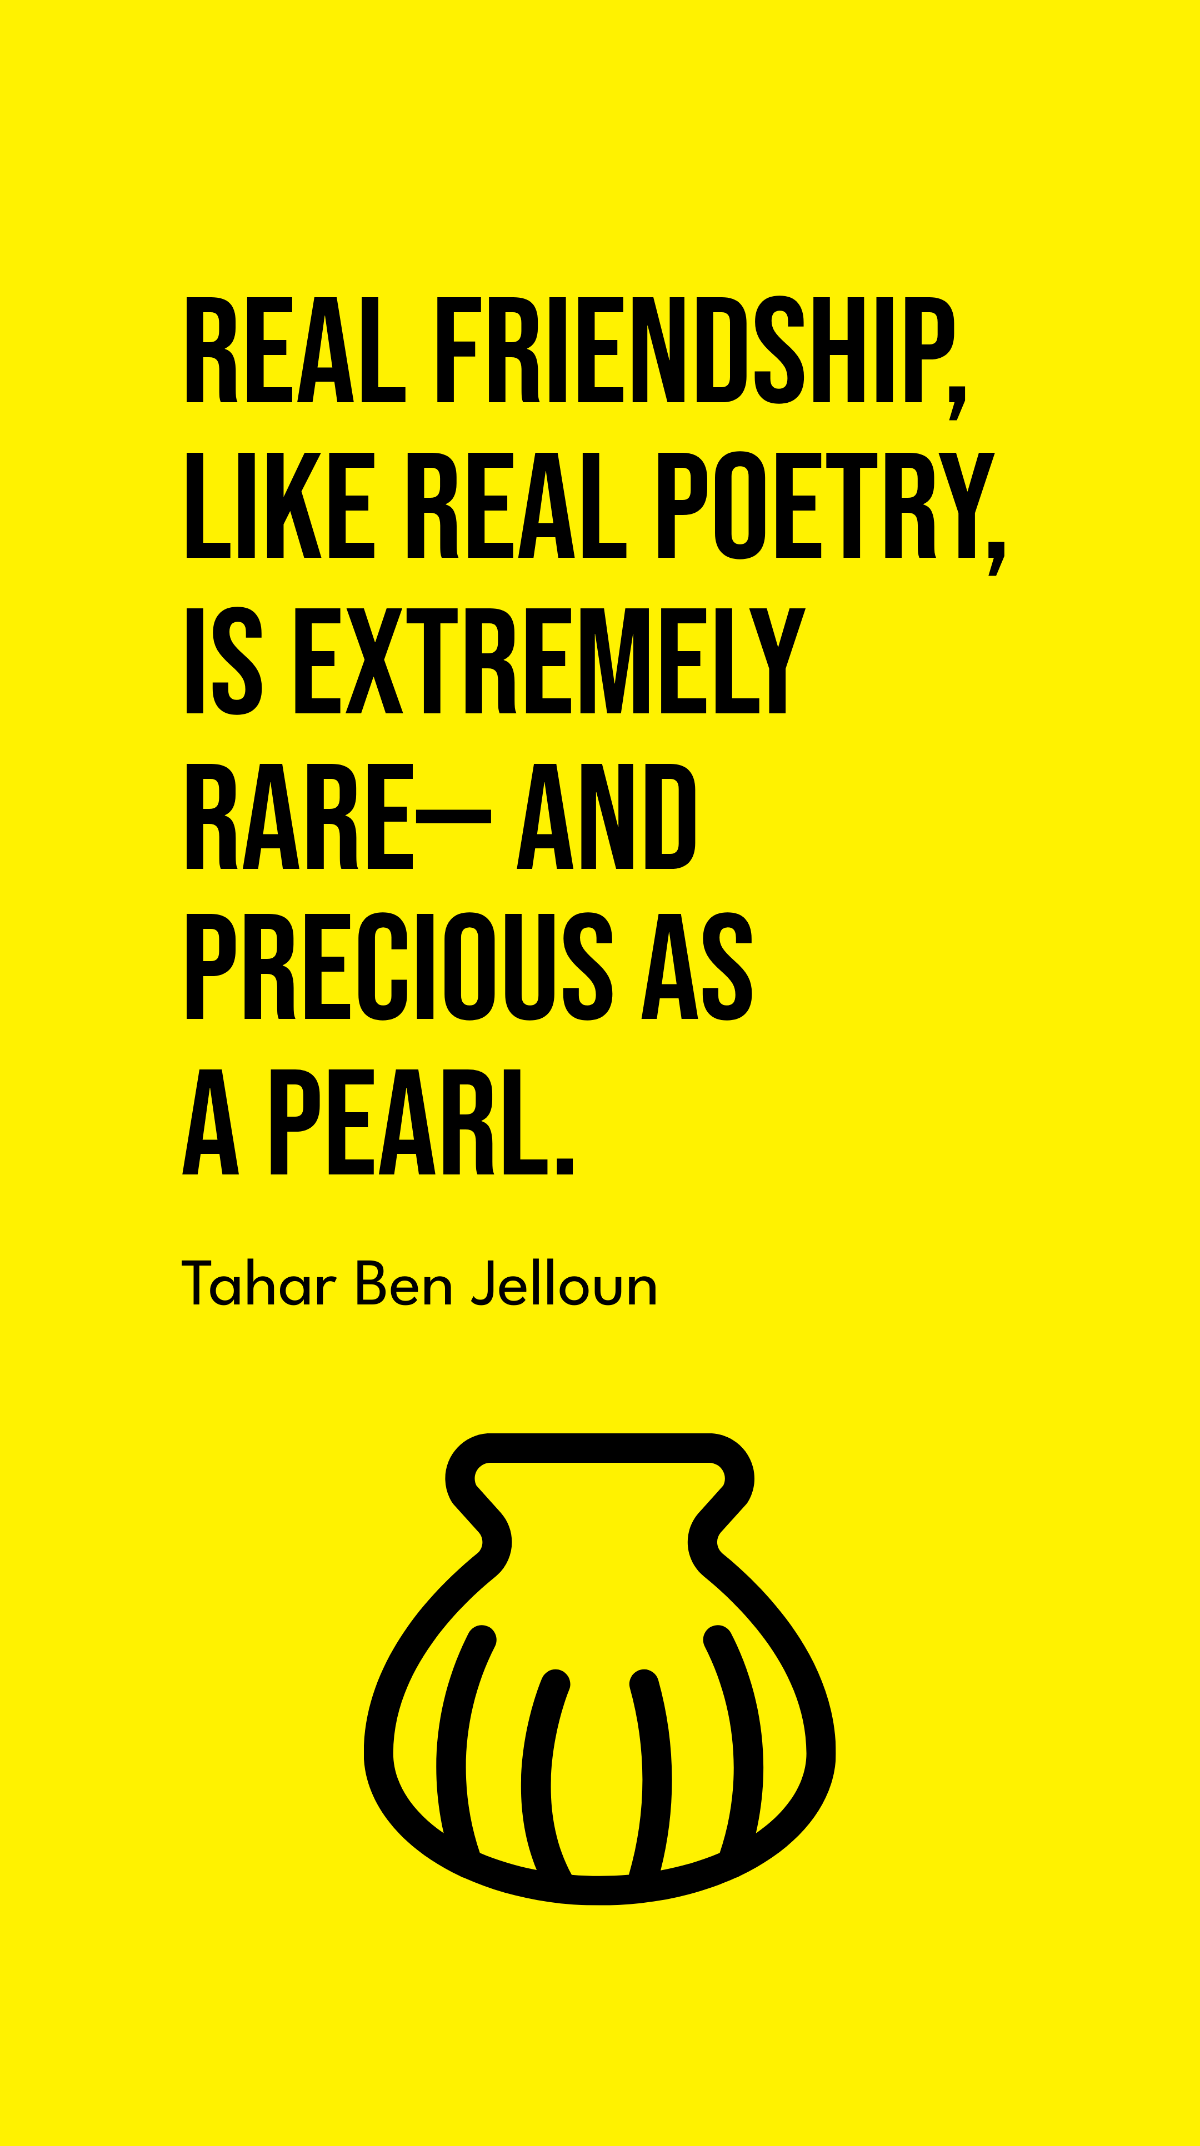 Tahar Ben Jelloun - Real friendship, like real poetry, is extremely rare – and precious as a pearl. Template